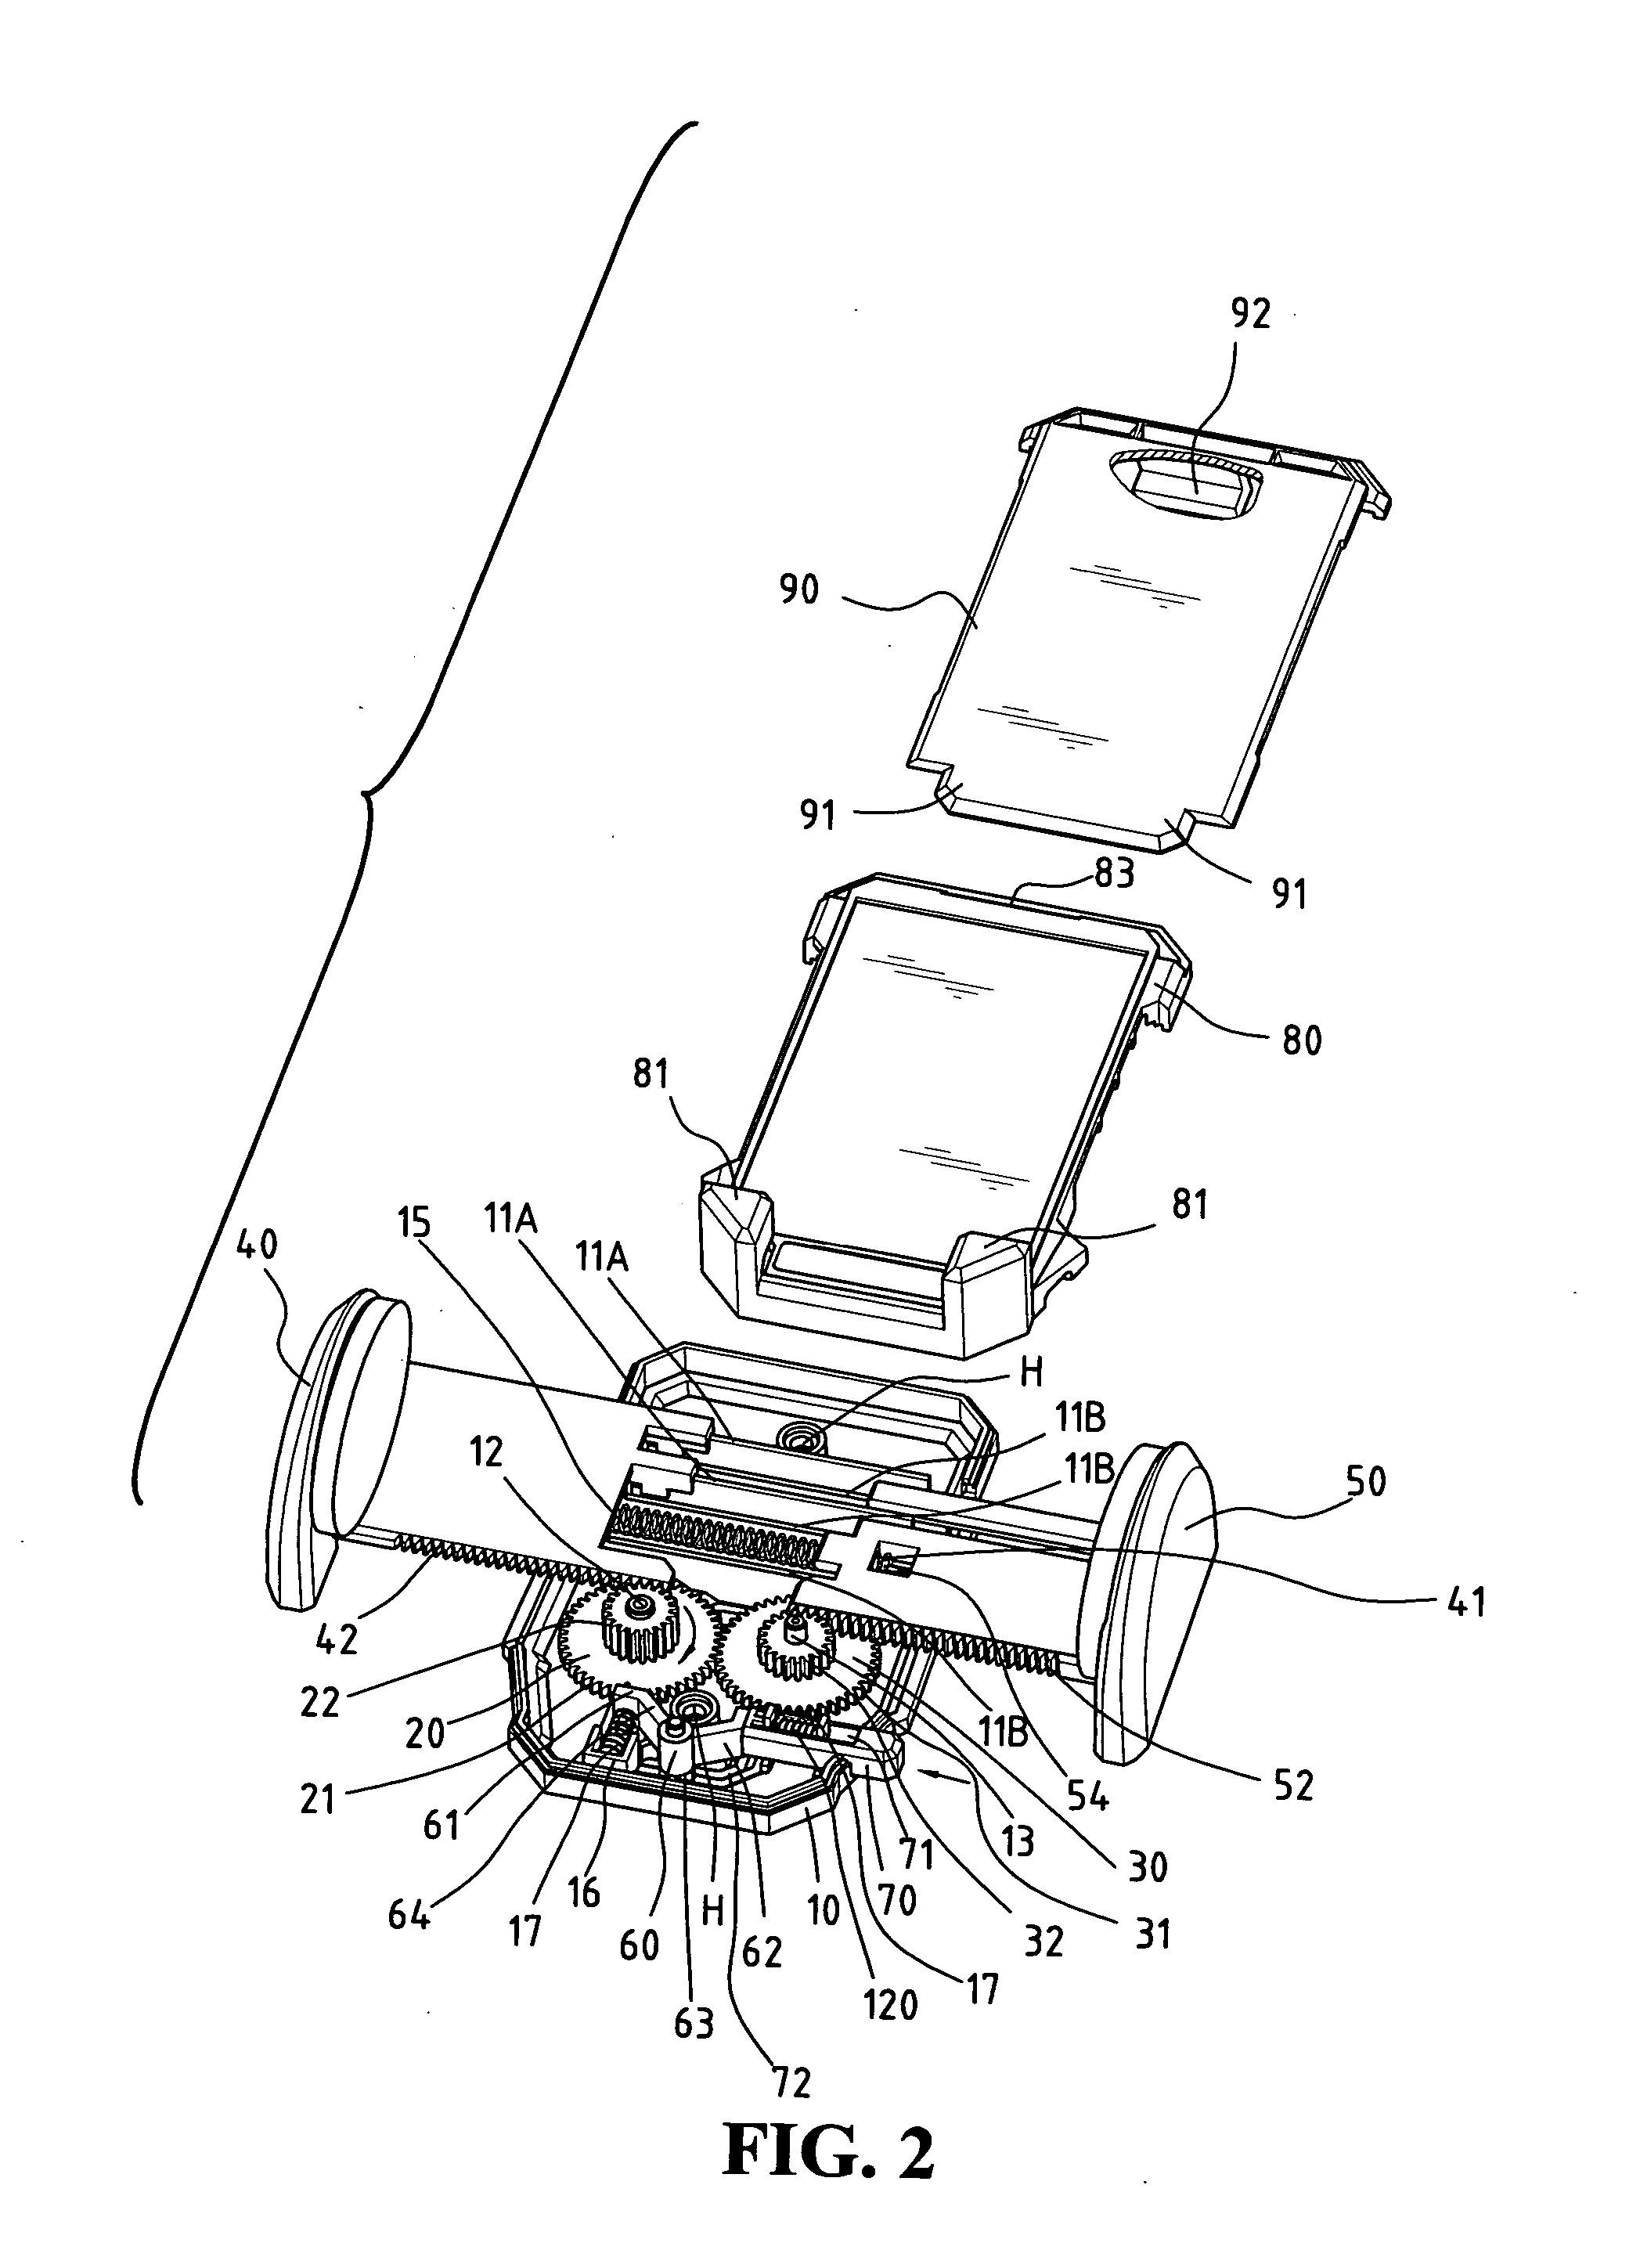 Electronic appliance holding device